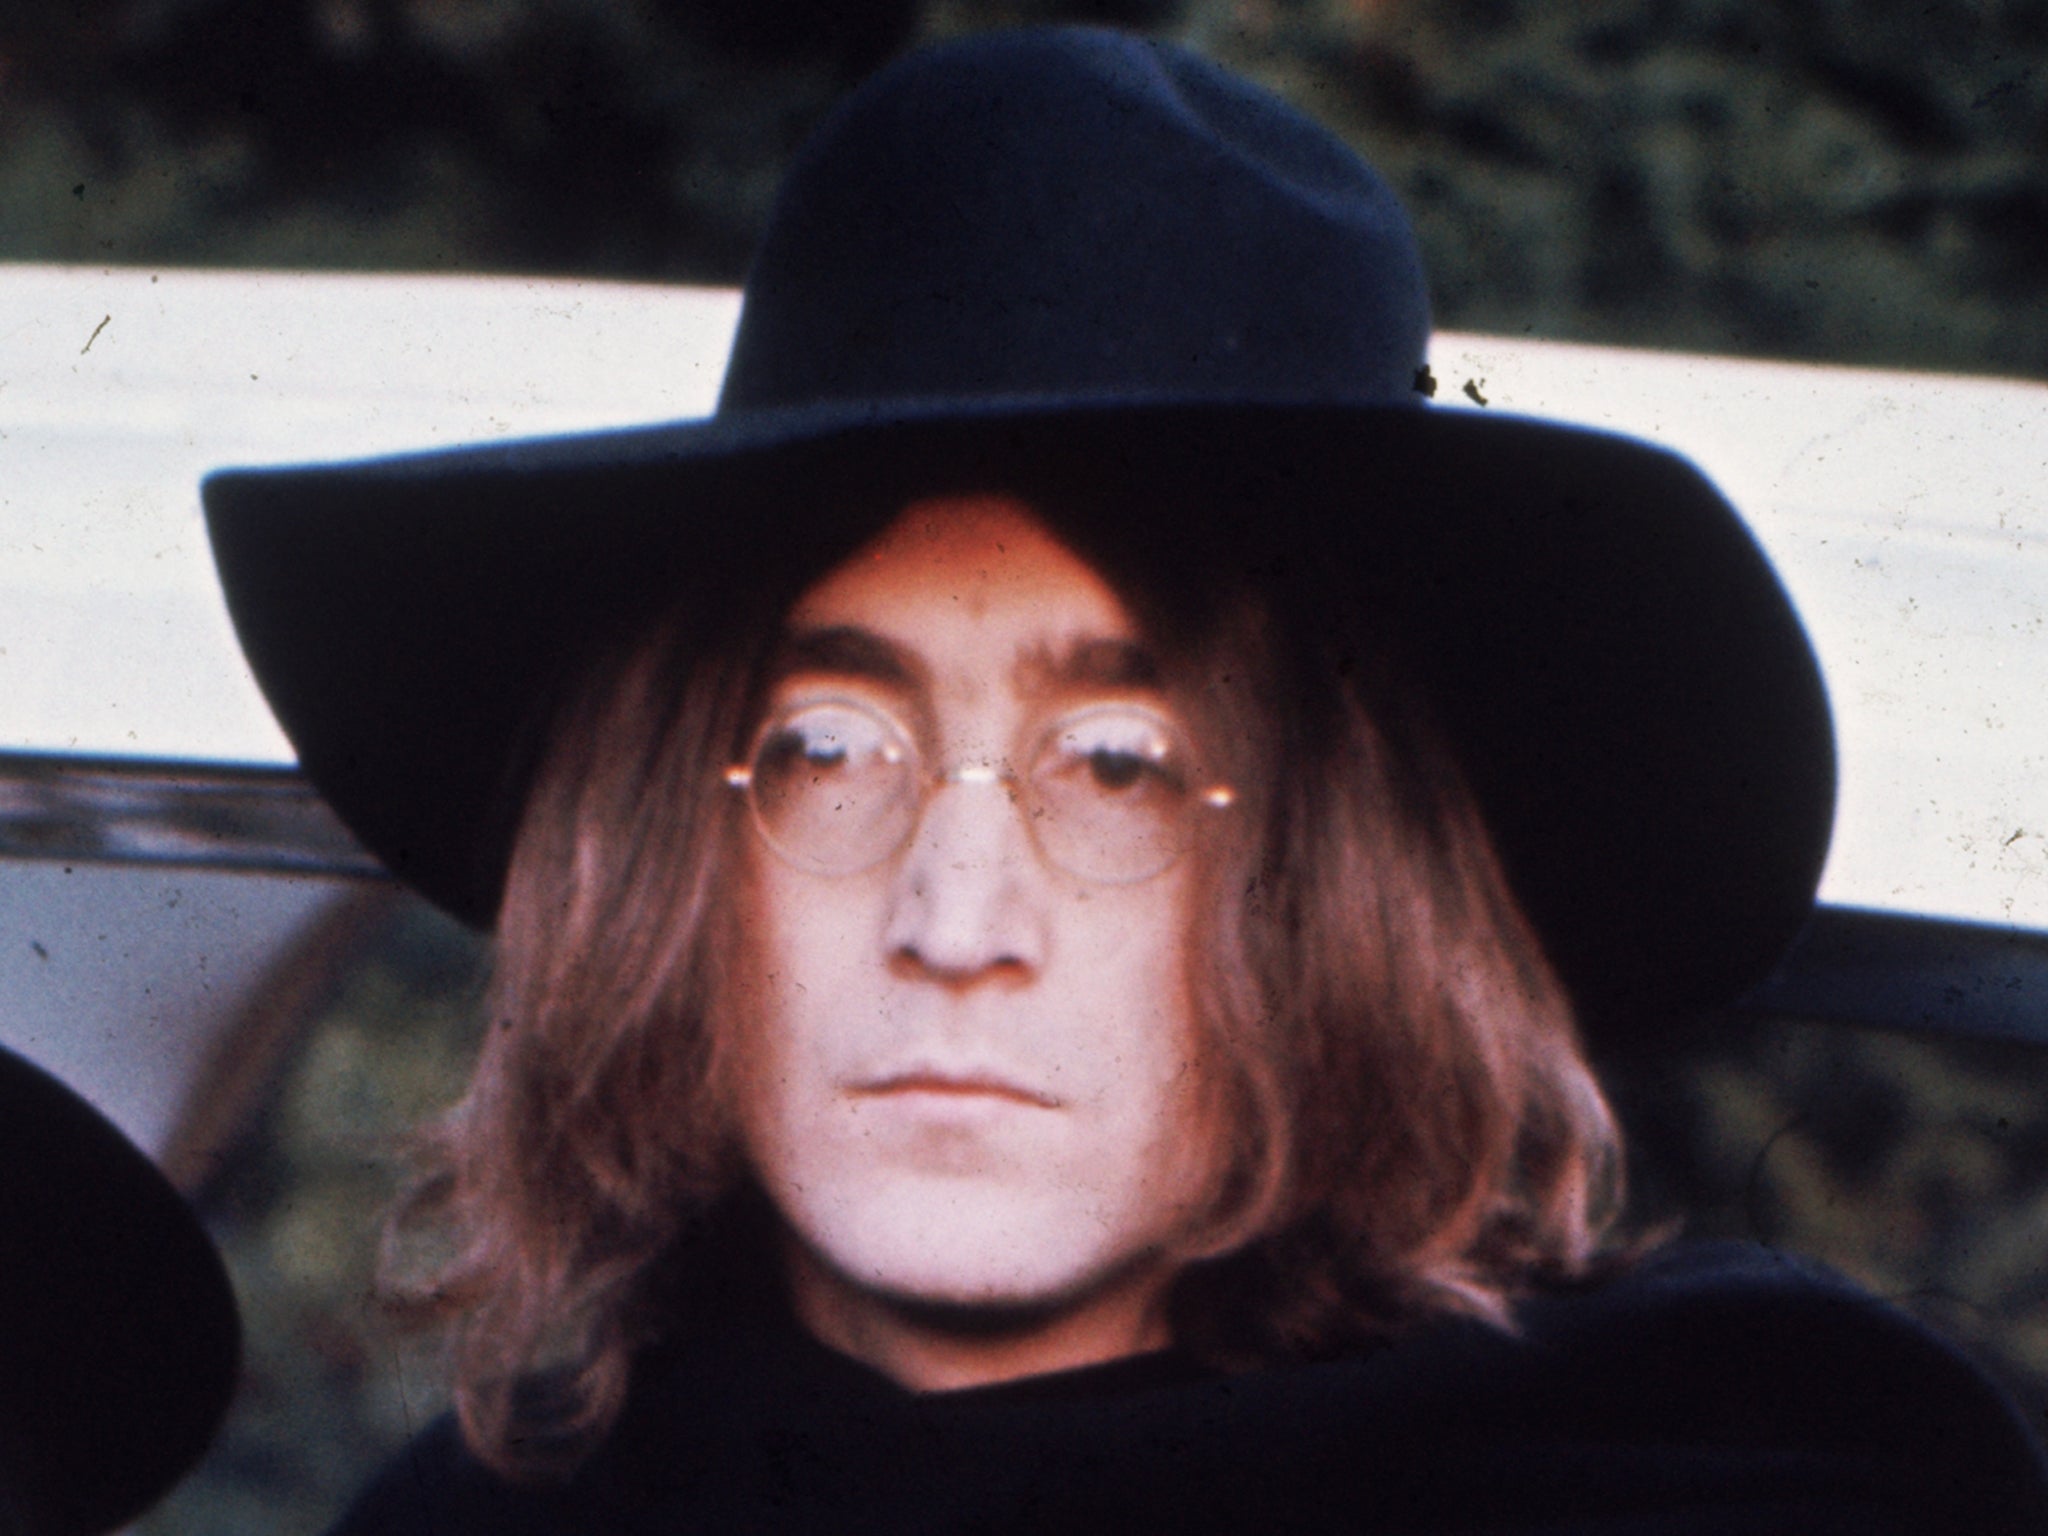 Lennon, pictured in 1969, said the ‘Let It Be’ song was one of his favourites